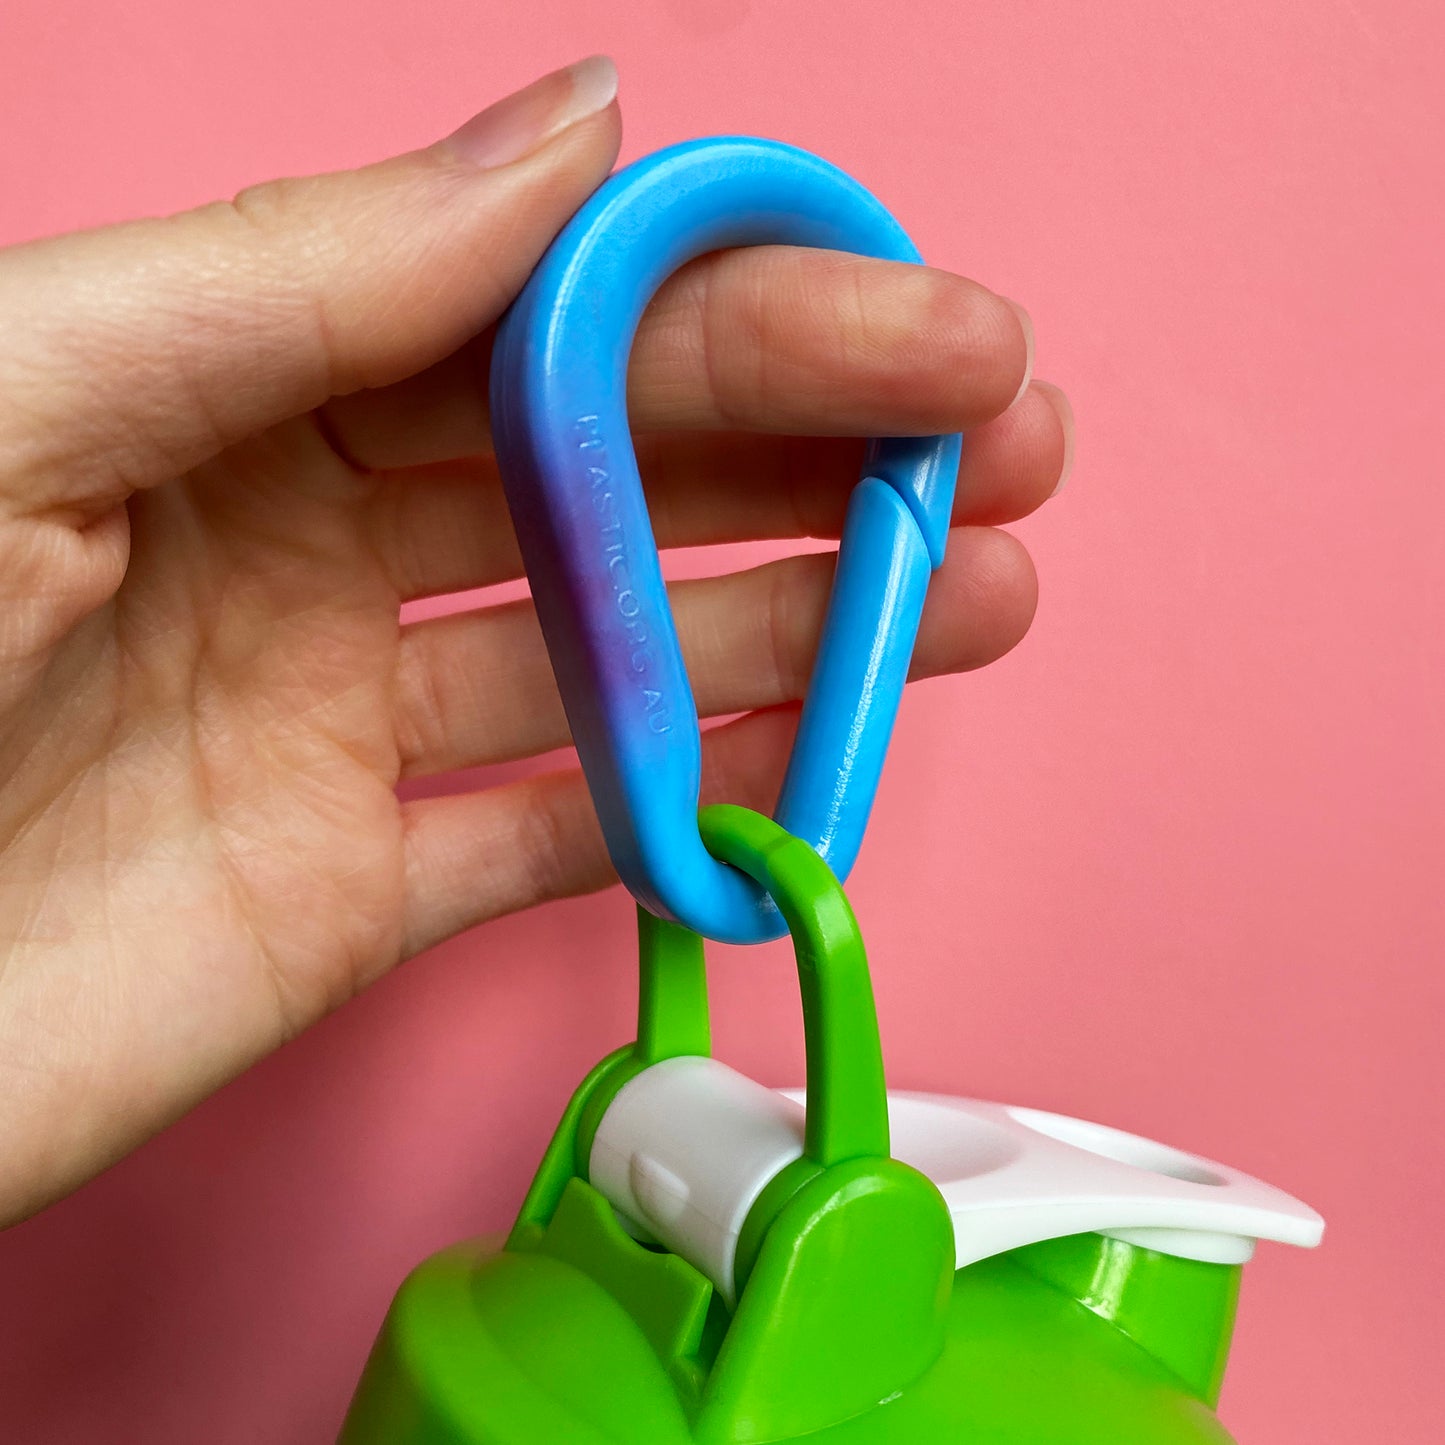 Recycle plastic waste into funky, colourful carabiners